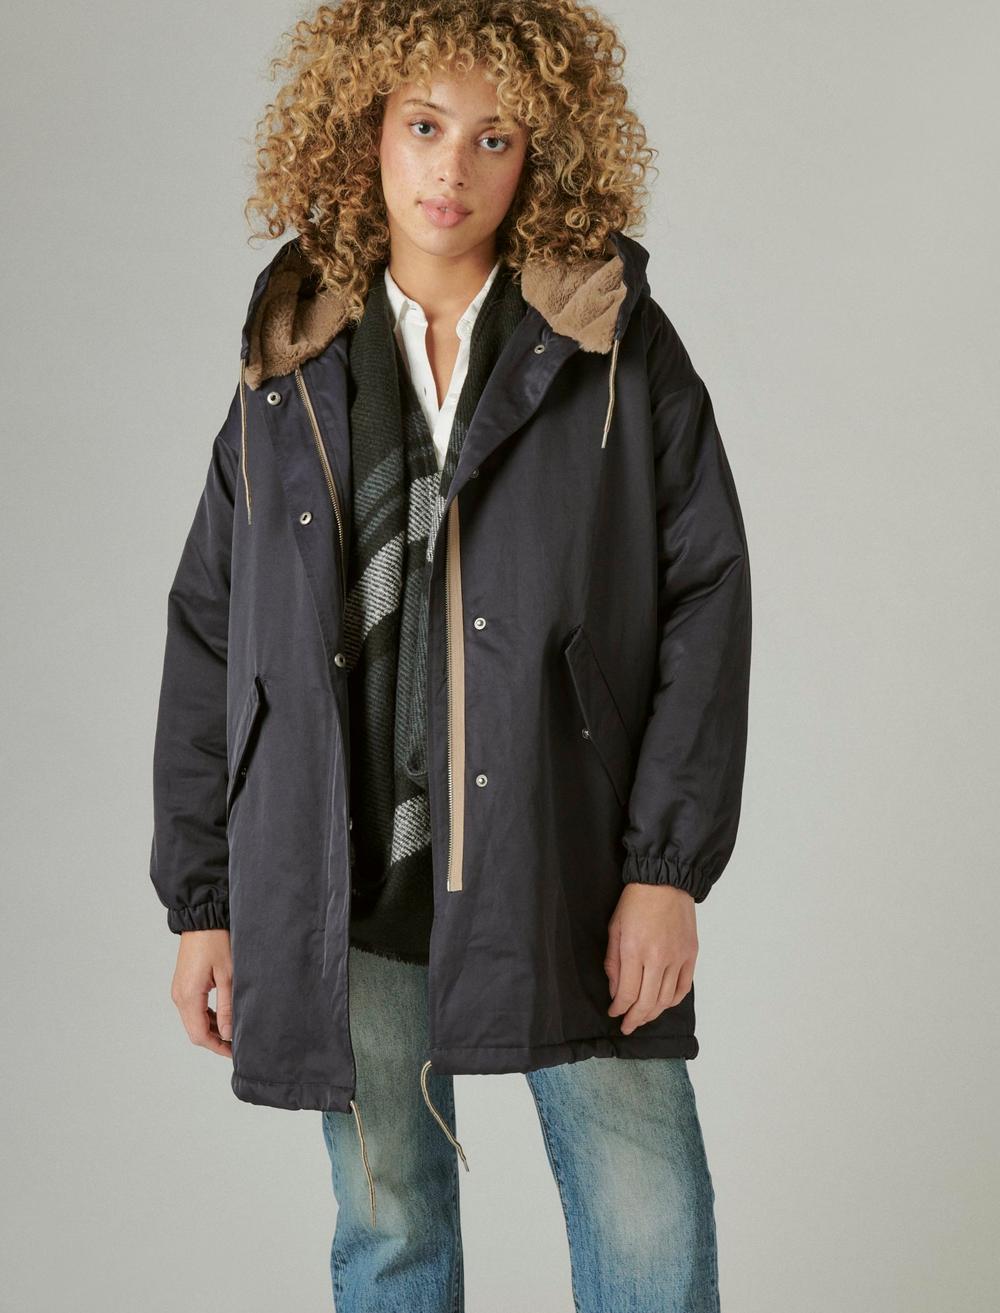 Lucky Brand Best Deals of the Season: 70% off on Select Styles